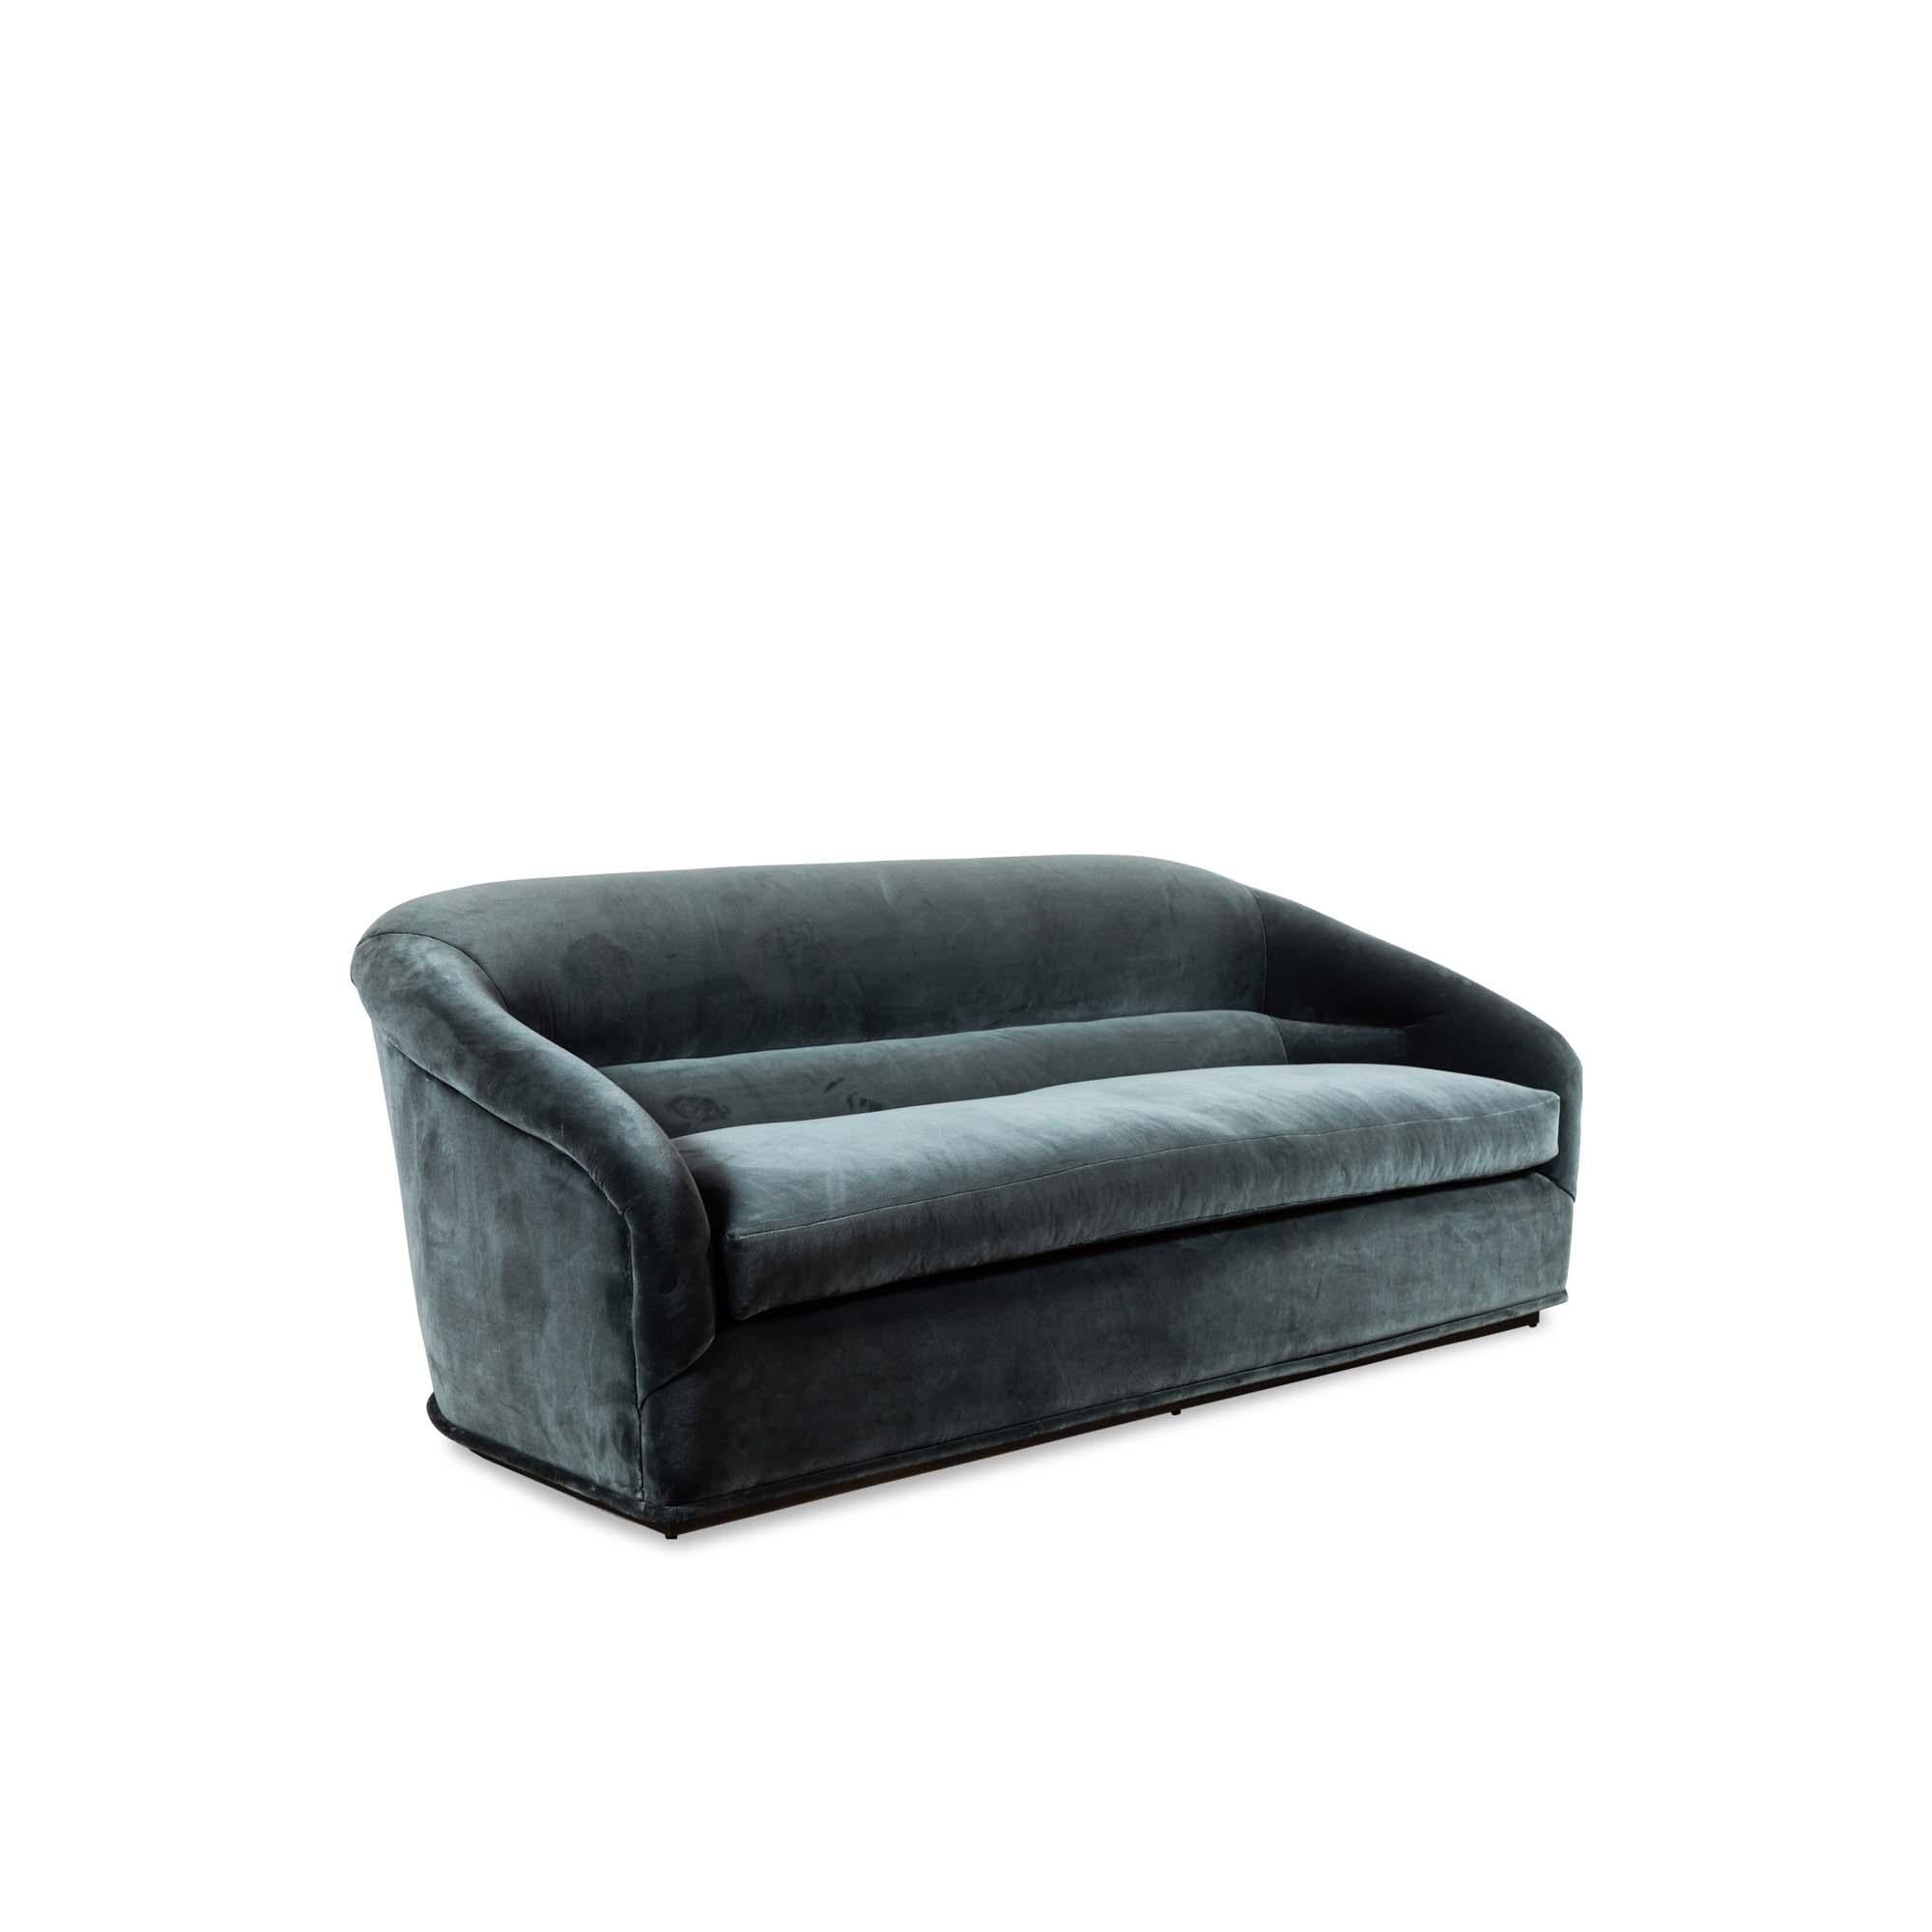 Velvet Huxley sofa by Lawson-Fenning. The Huxley sofa is inspired by 1970s lounge furniture. A curvaceous form with a single line tuft and long seat cushion rest atop a polished brass base. 

The Lawson-Fenning Collection is designed and handmade